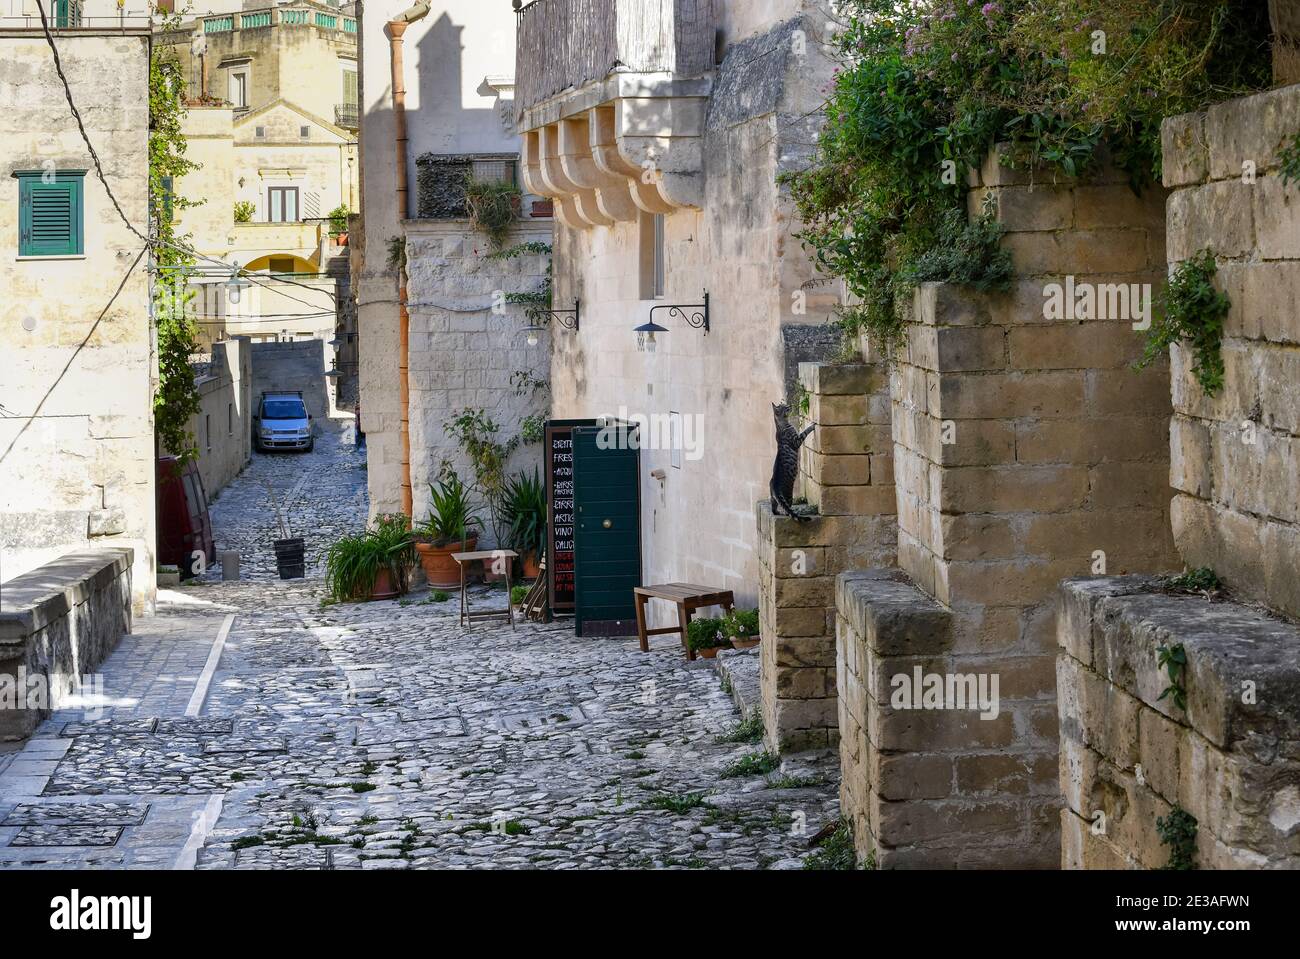 A silver striped tabby stands on his hind legs on a ledge on a cobbled street in the ancient sassi town of Matera, Italy. Stock Photo